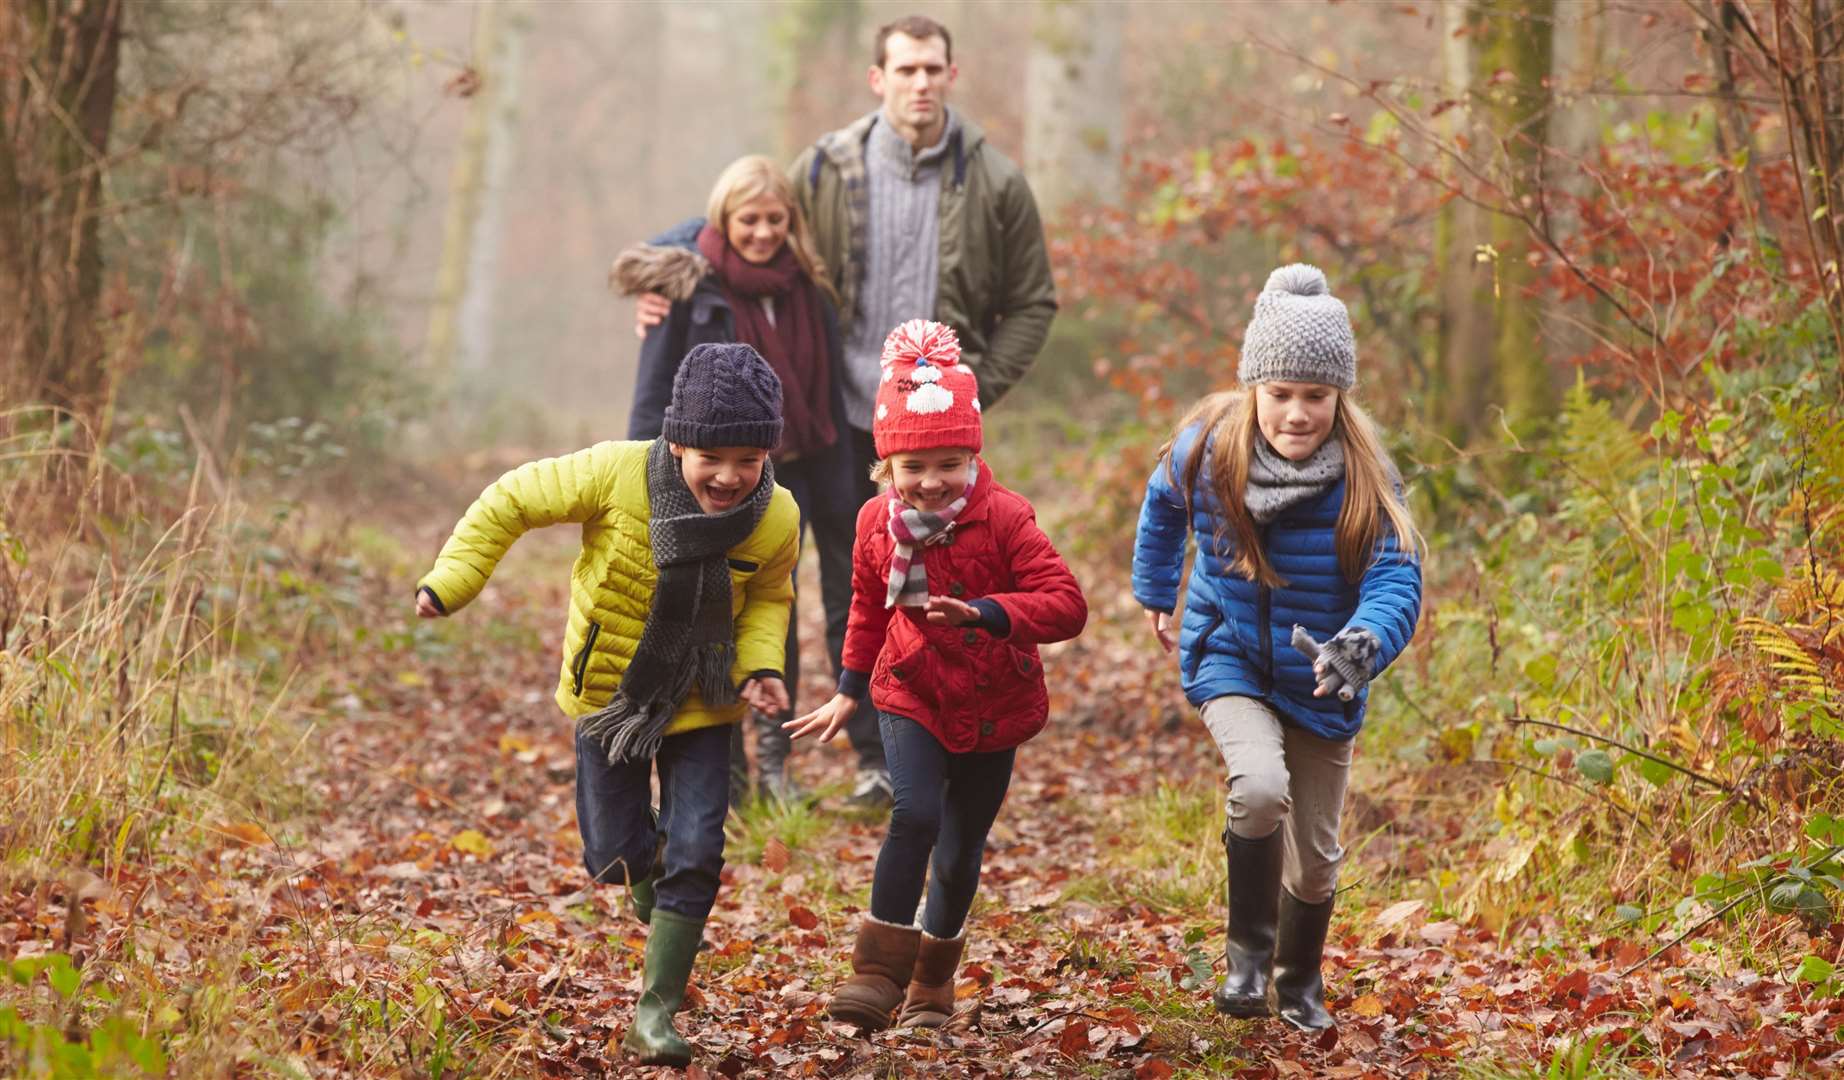 We've picked out some great family things to do in West Kent during half term!